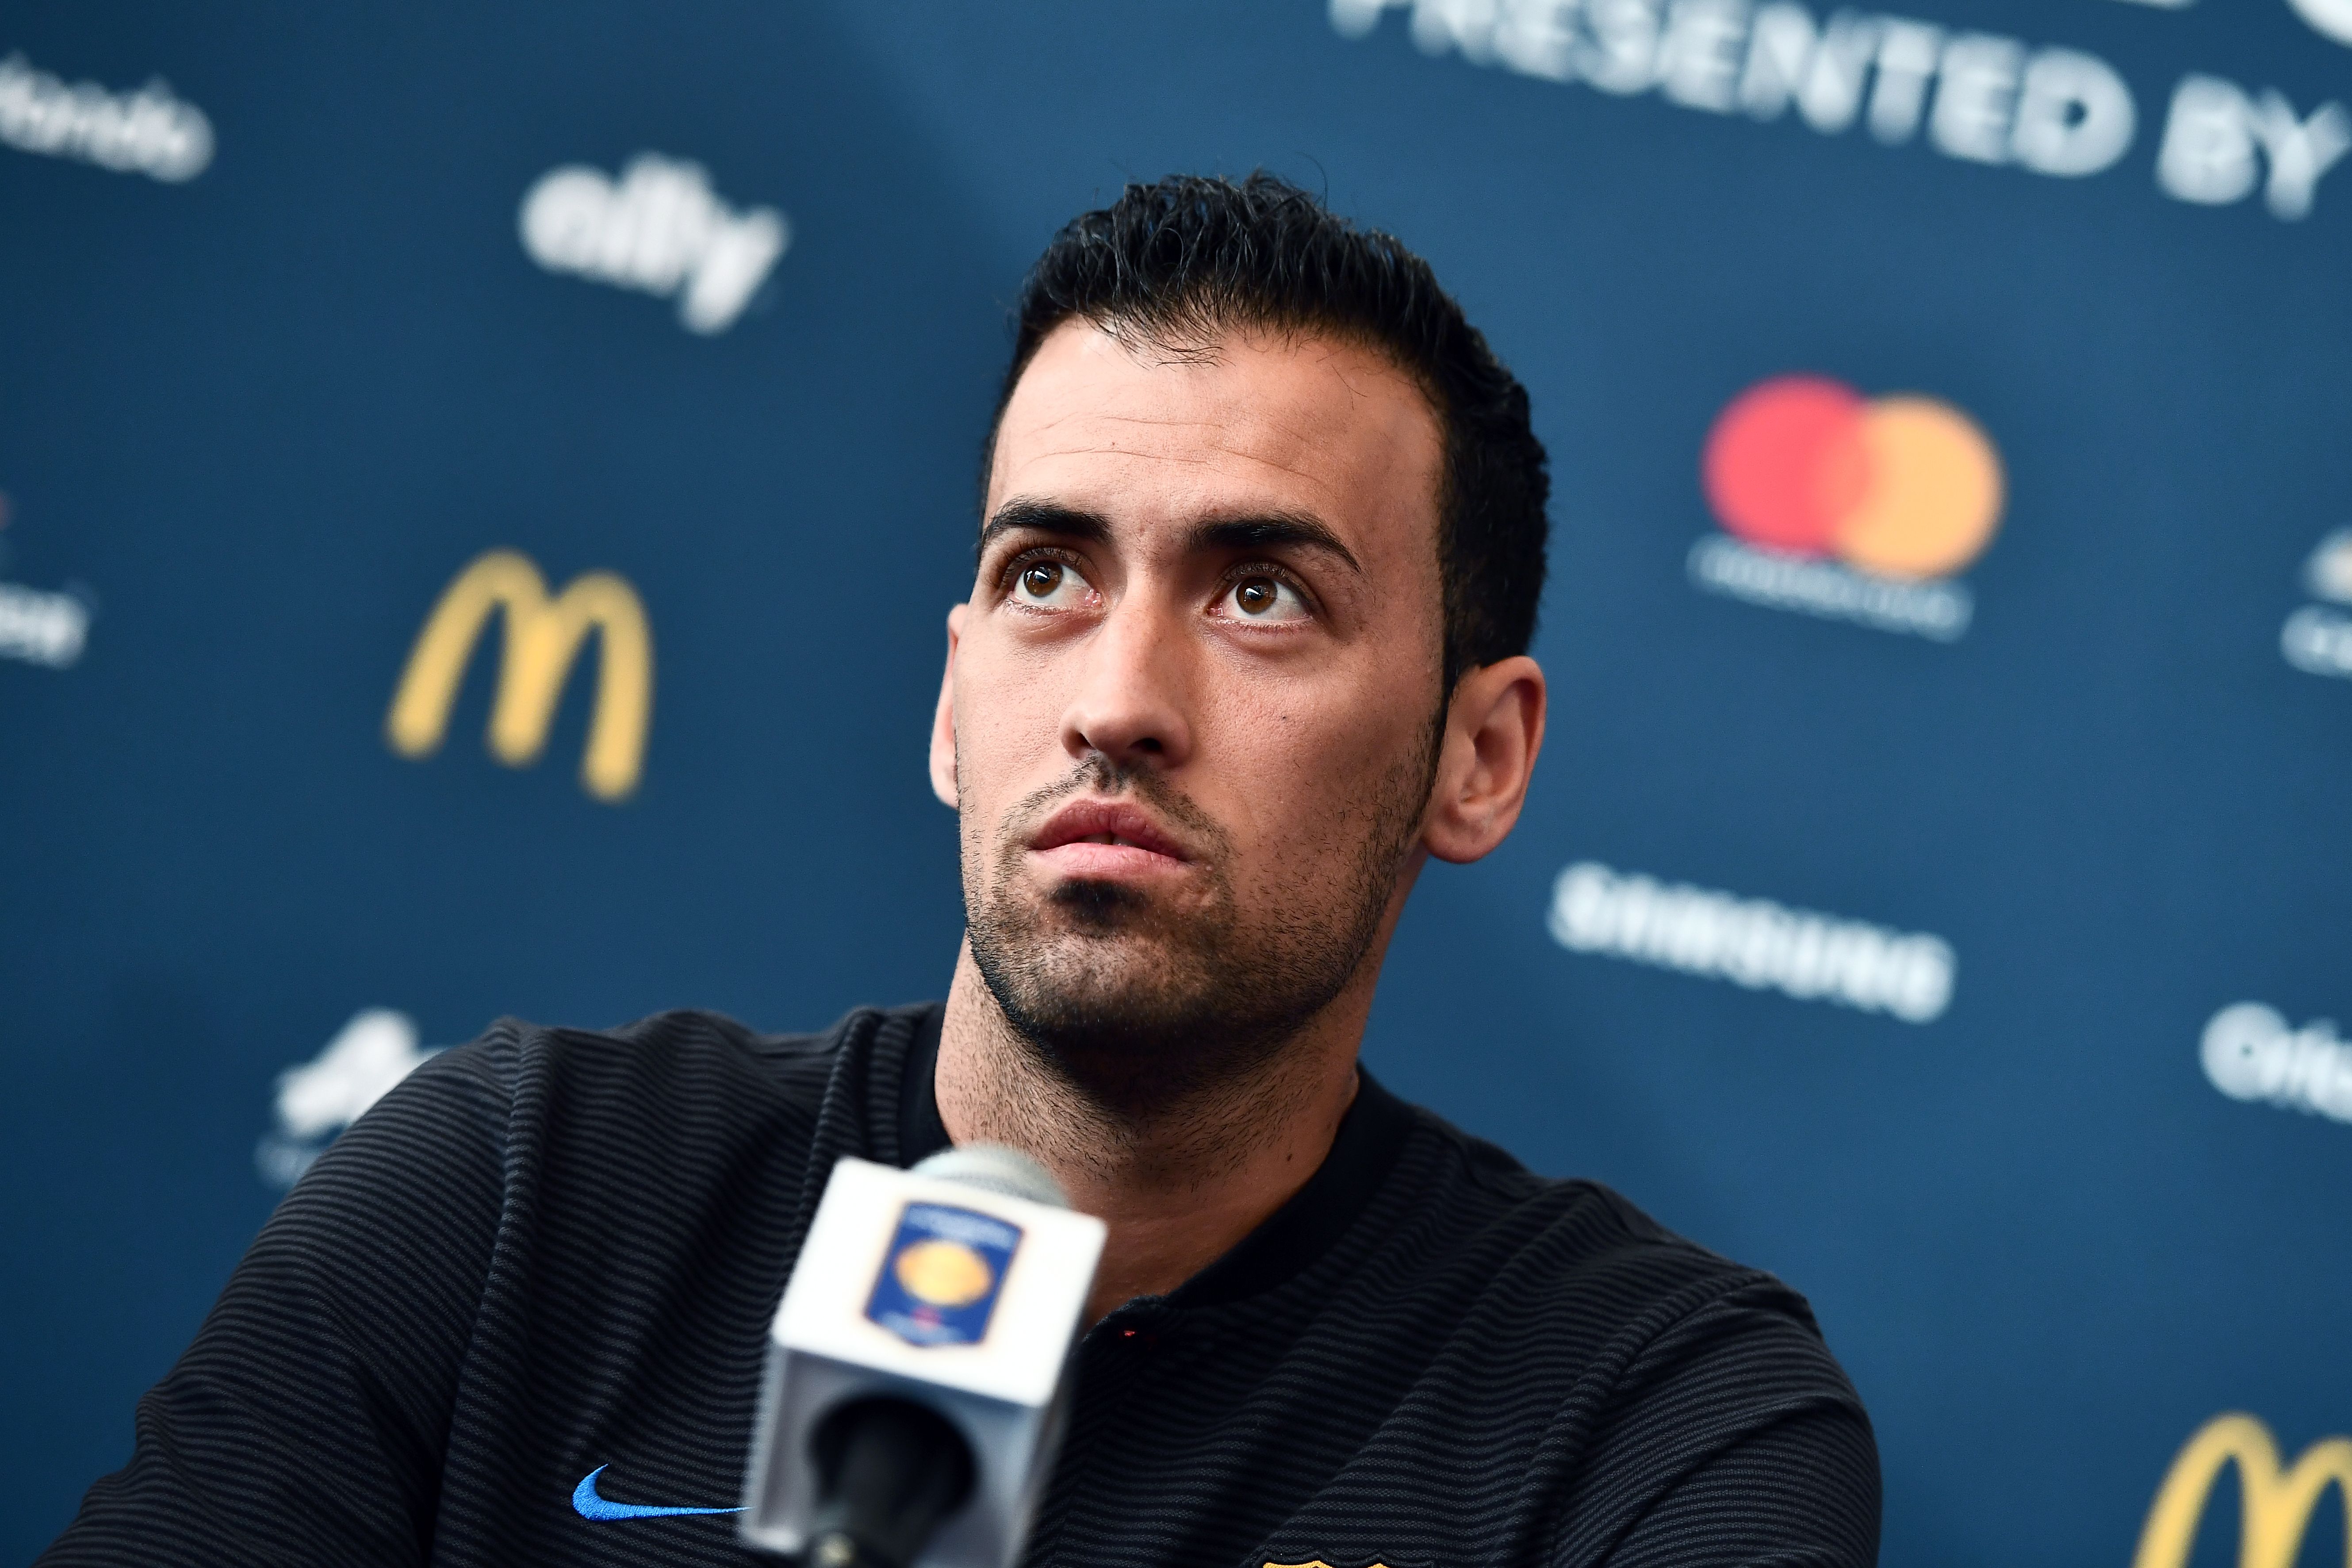 Sergio Busquets will soon lead Barcelona for the final time. (Photo by Jewel Samad/AFP/Getty Images)